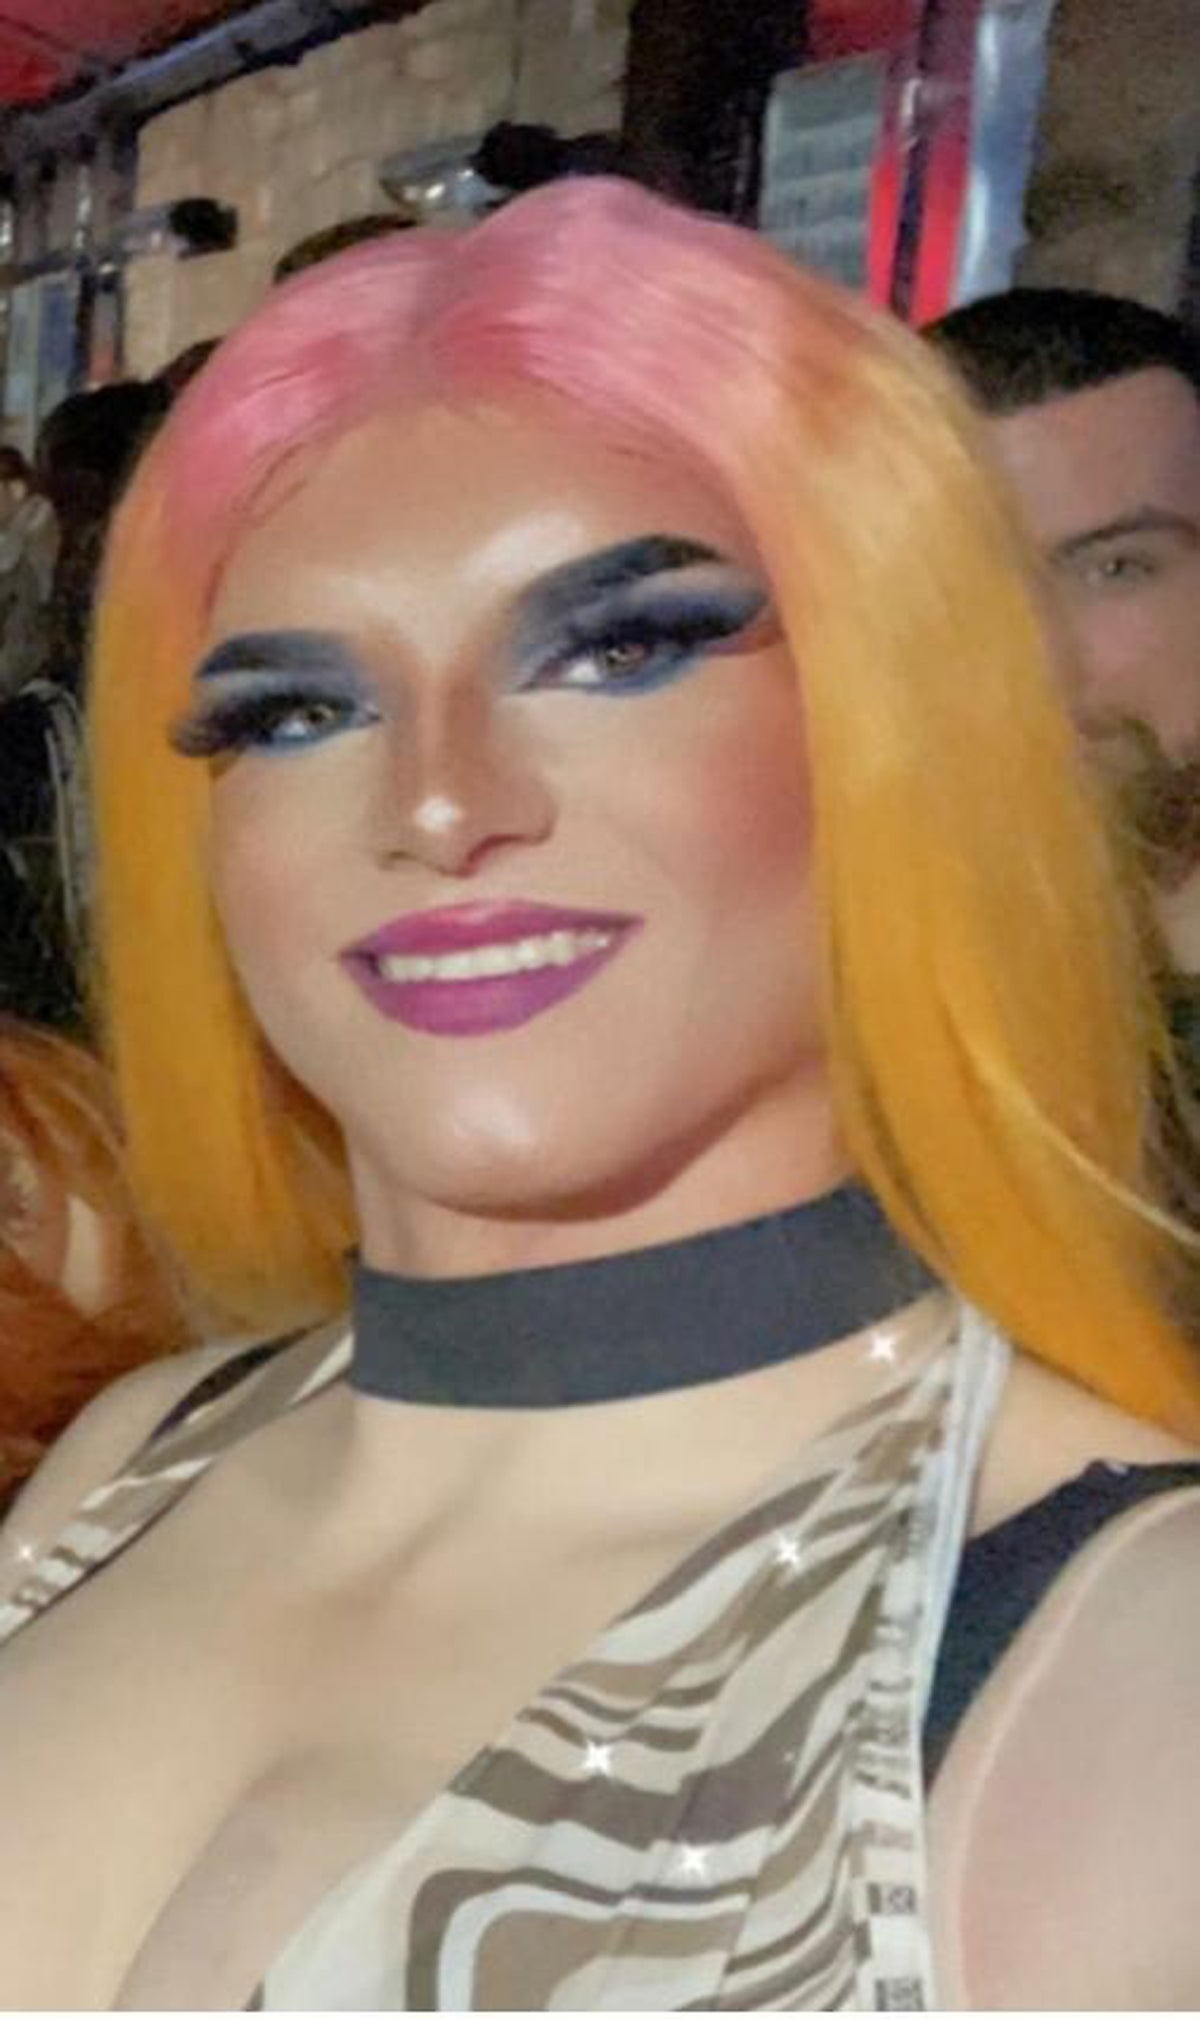 Daniel McDonnell was dressed in drag when he and his partner Giles Norton were subjected to homophobic abuse on a bus in Cheltenham (Gloucestershire Police/PA)